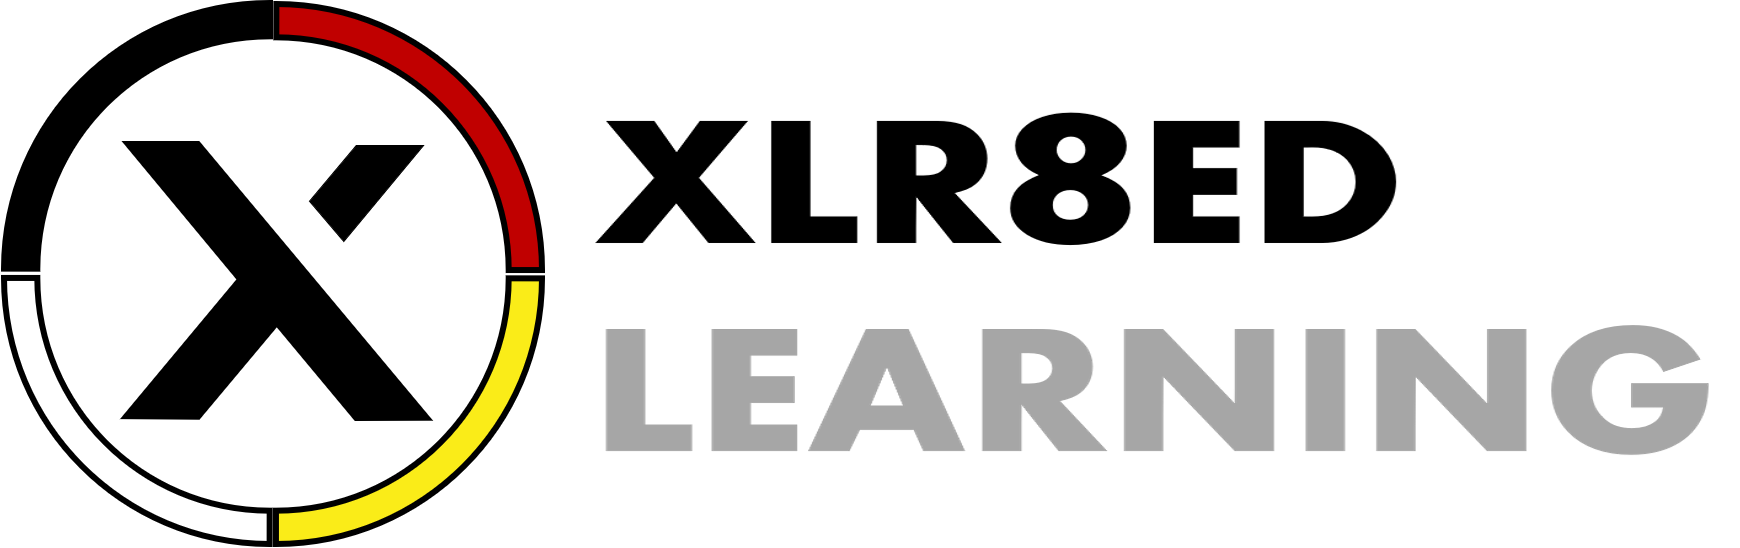 accelerated learning title logo - XLR8eLearning